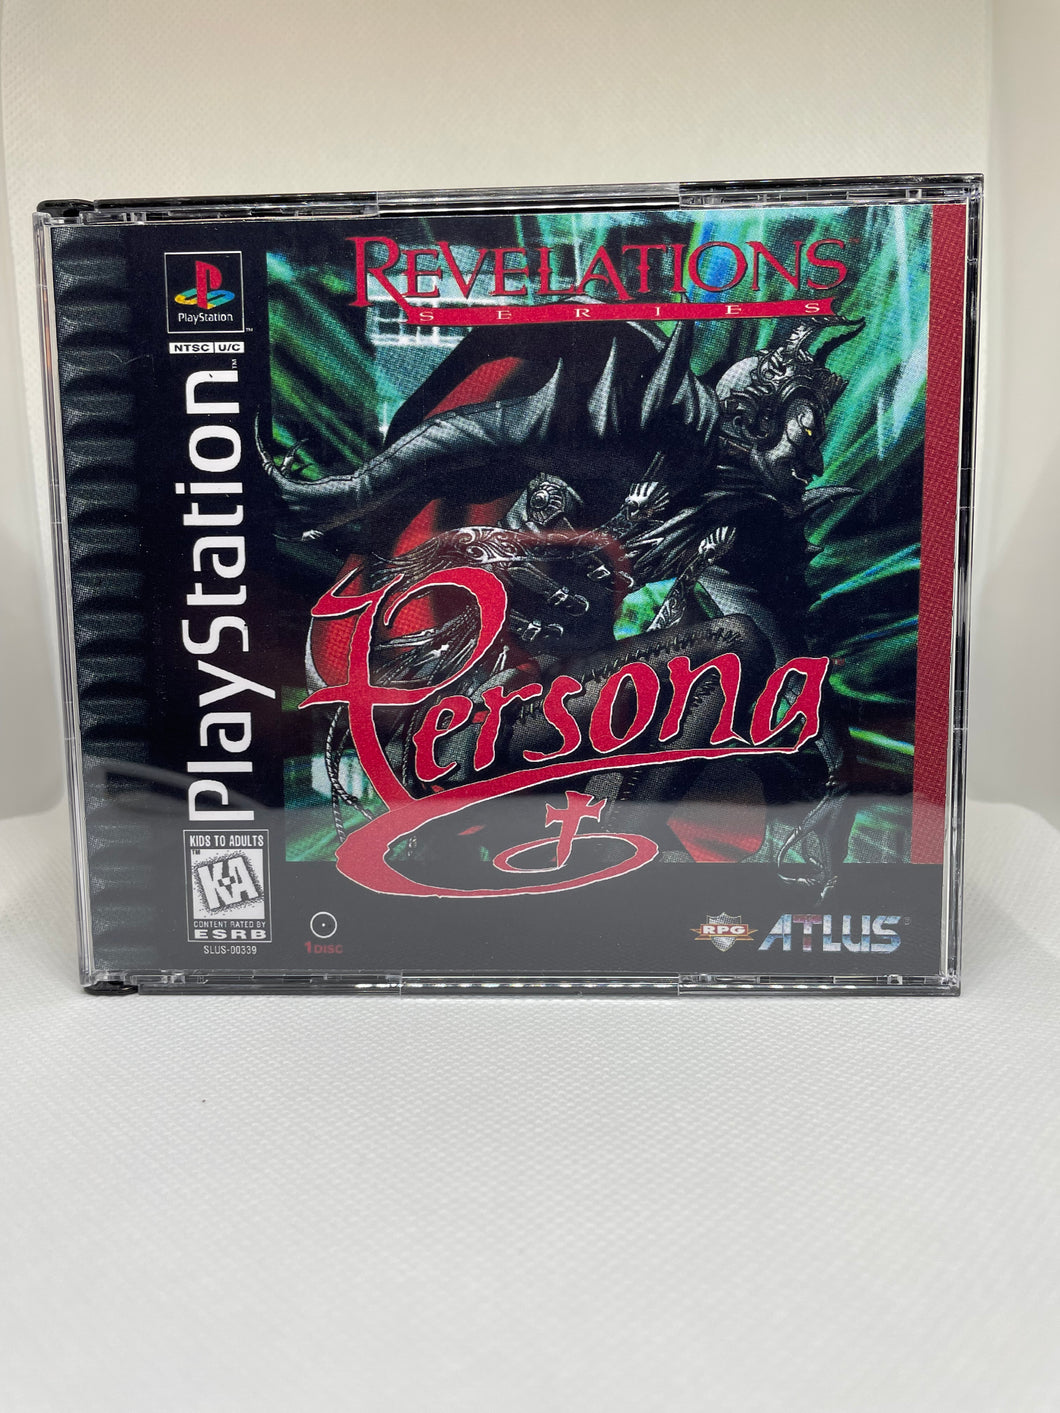 Persona Revelations PS1 Reproduction Case